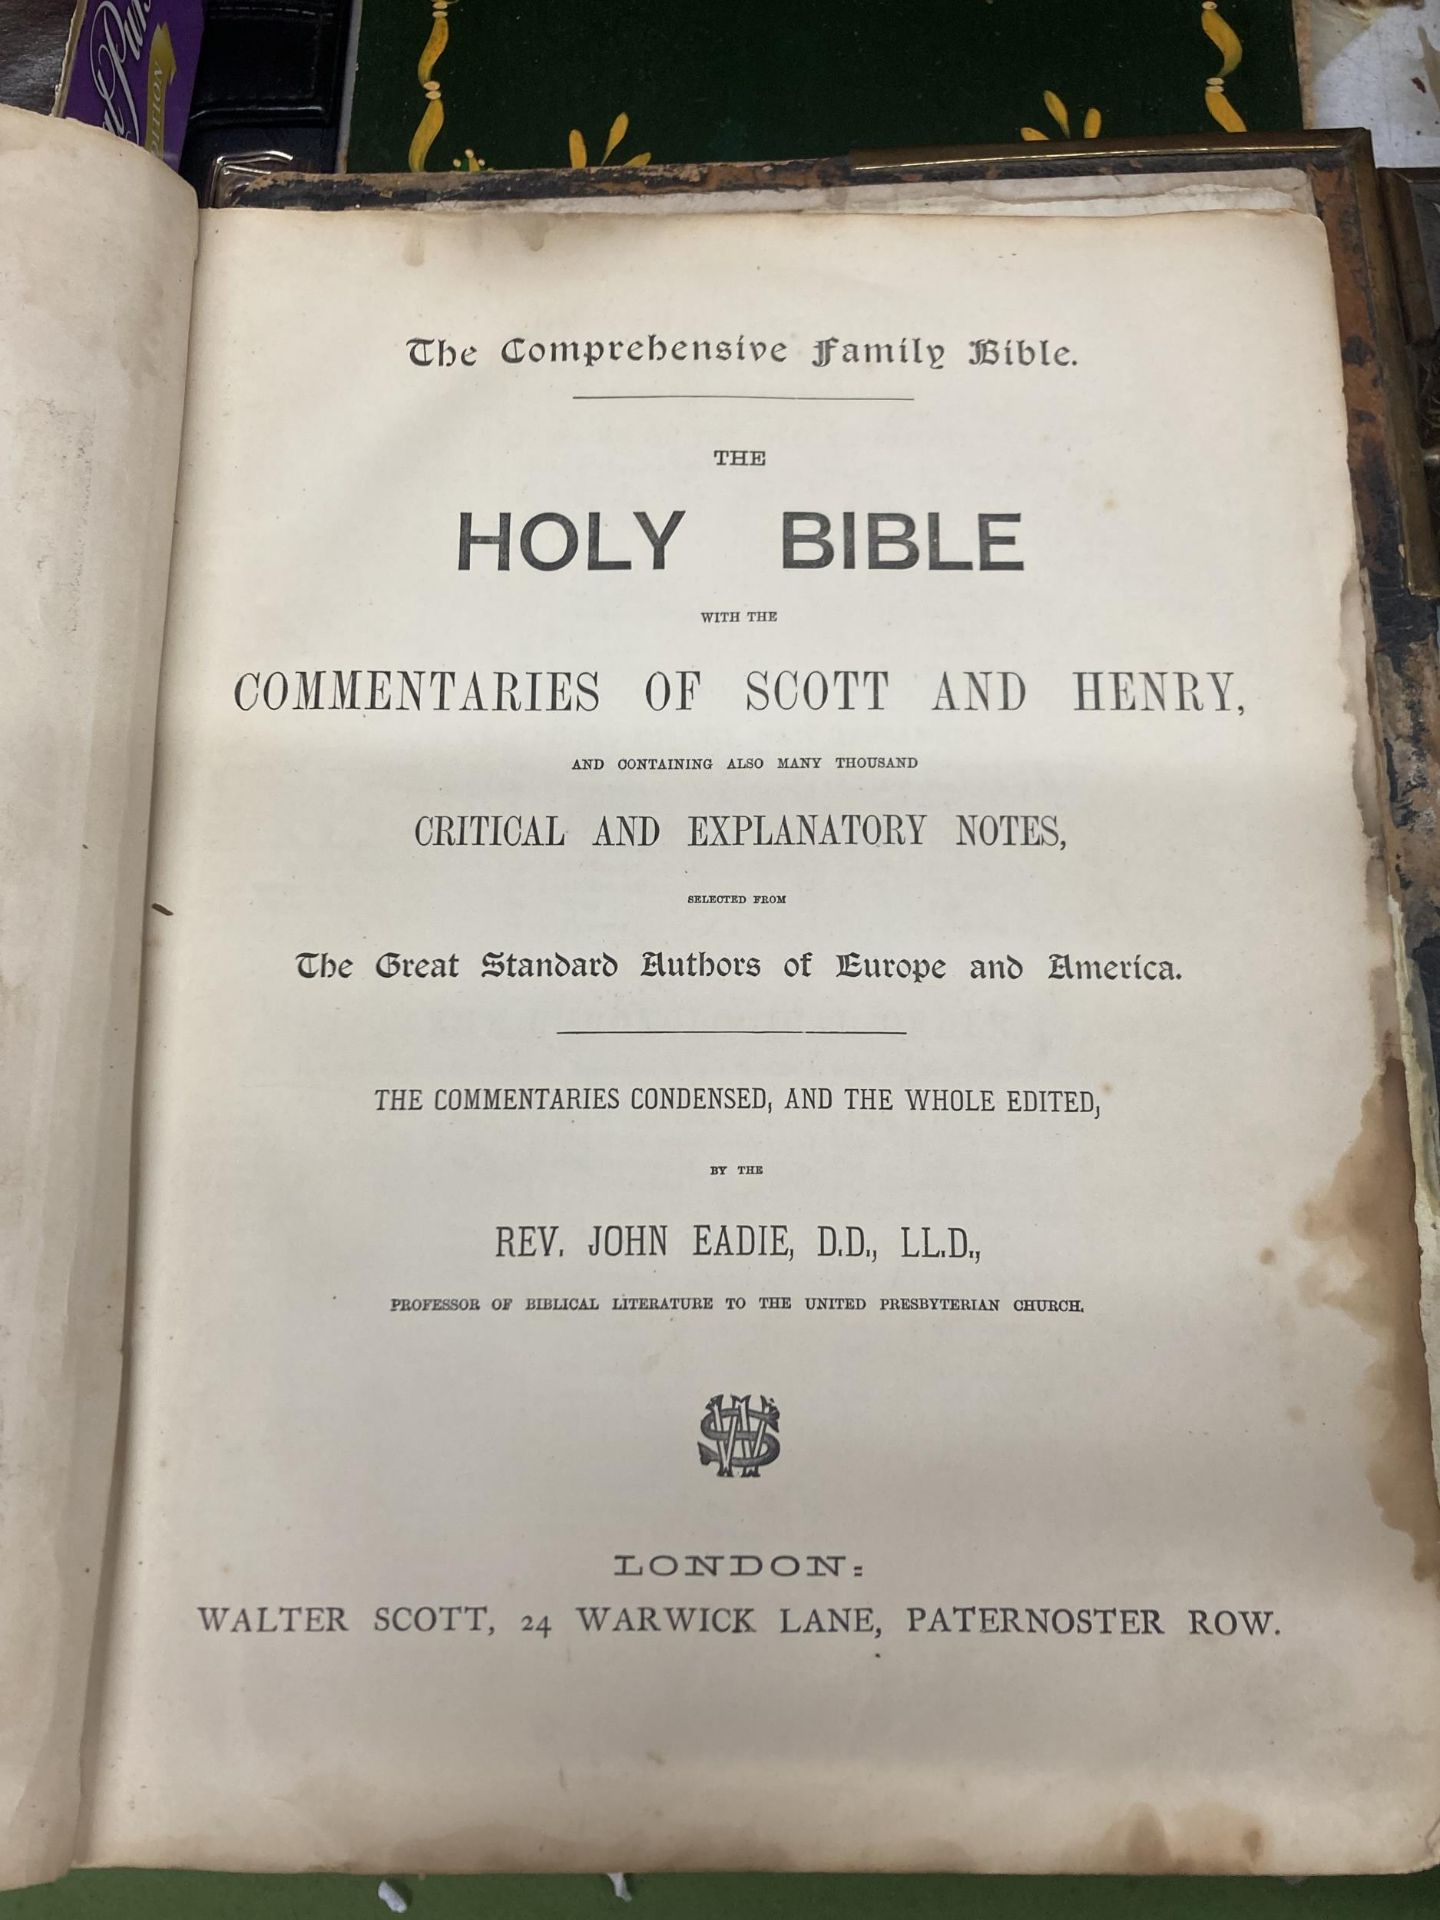 TWO EARLY HARDBACK HOLY BIBLES TO INCLUDE THE OLD AND NEW TESTHMENTS, THE SACRED TEXT OF THE OLD - Image 3 of 8